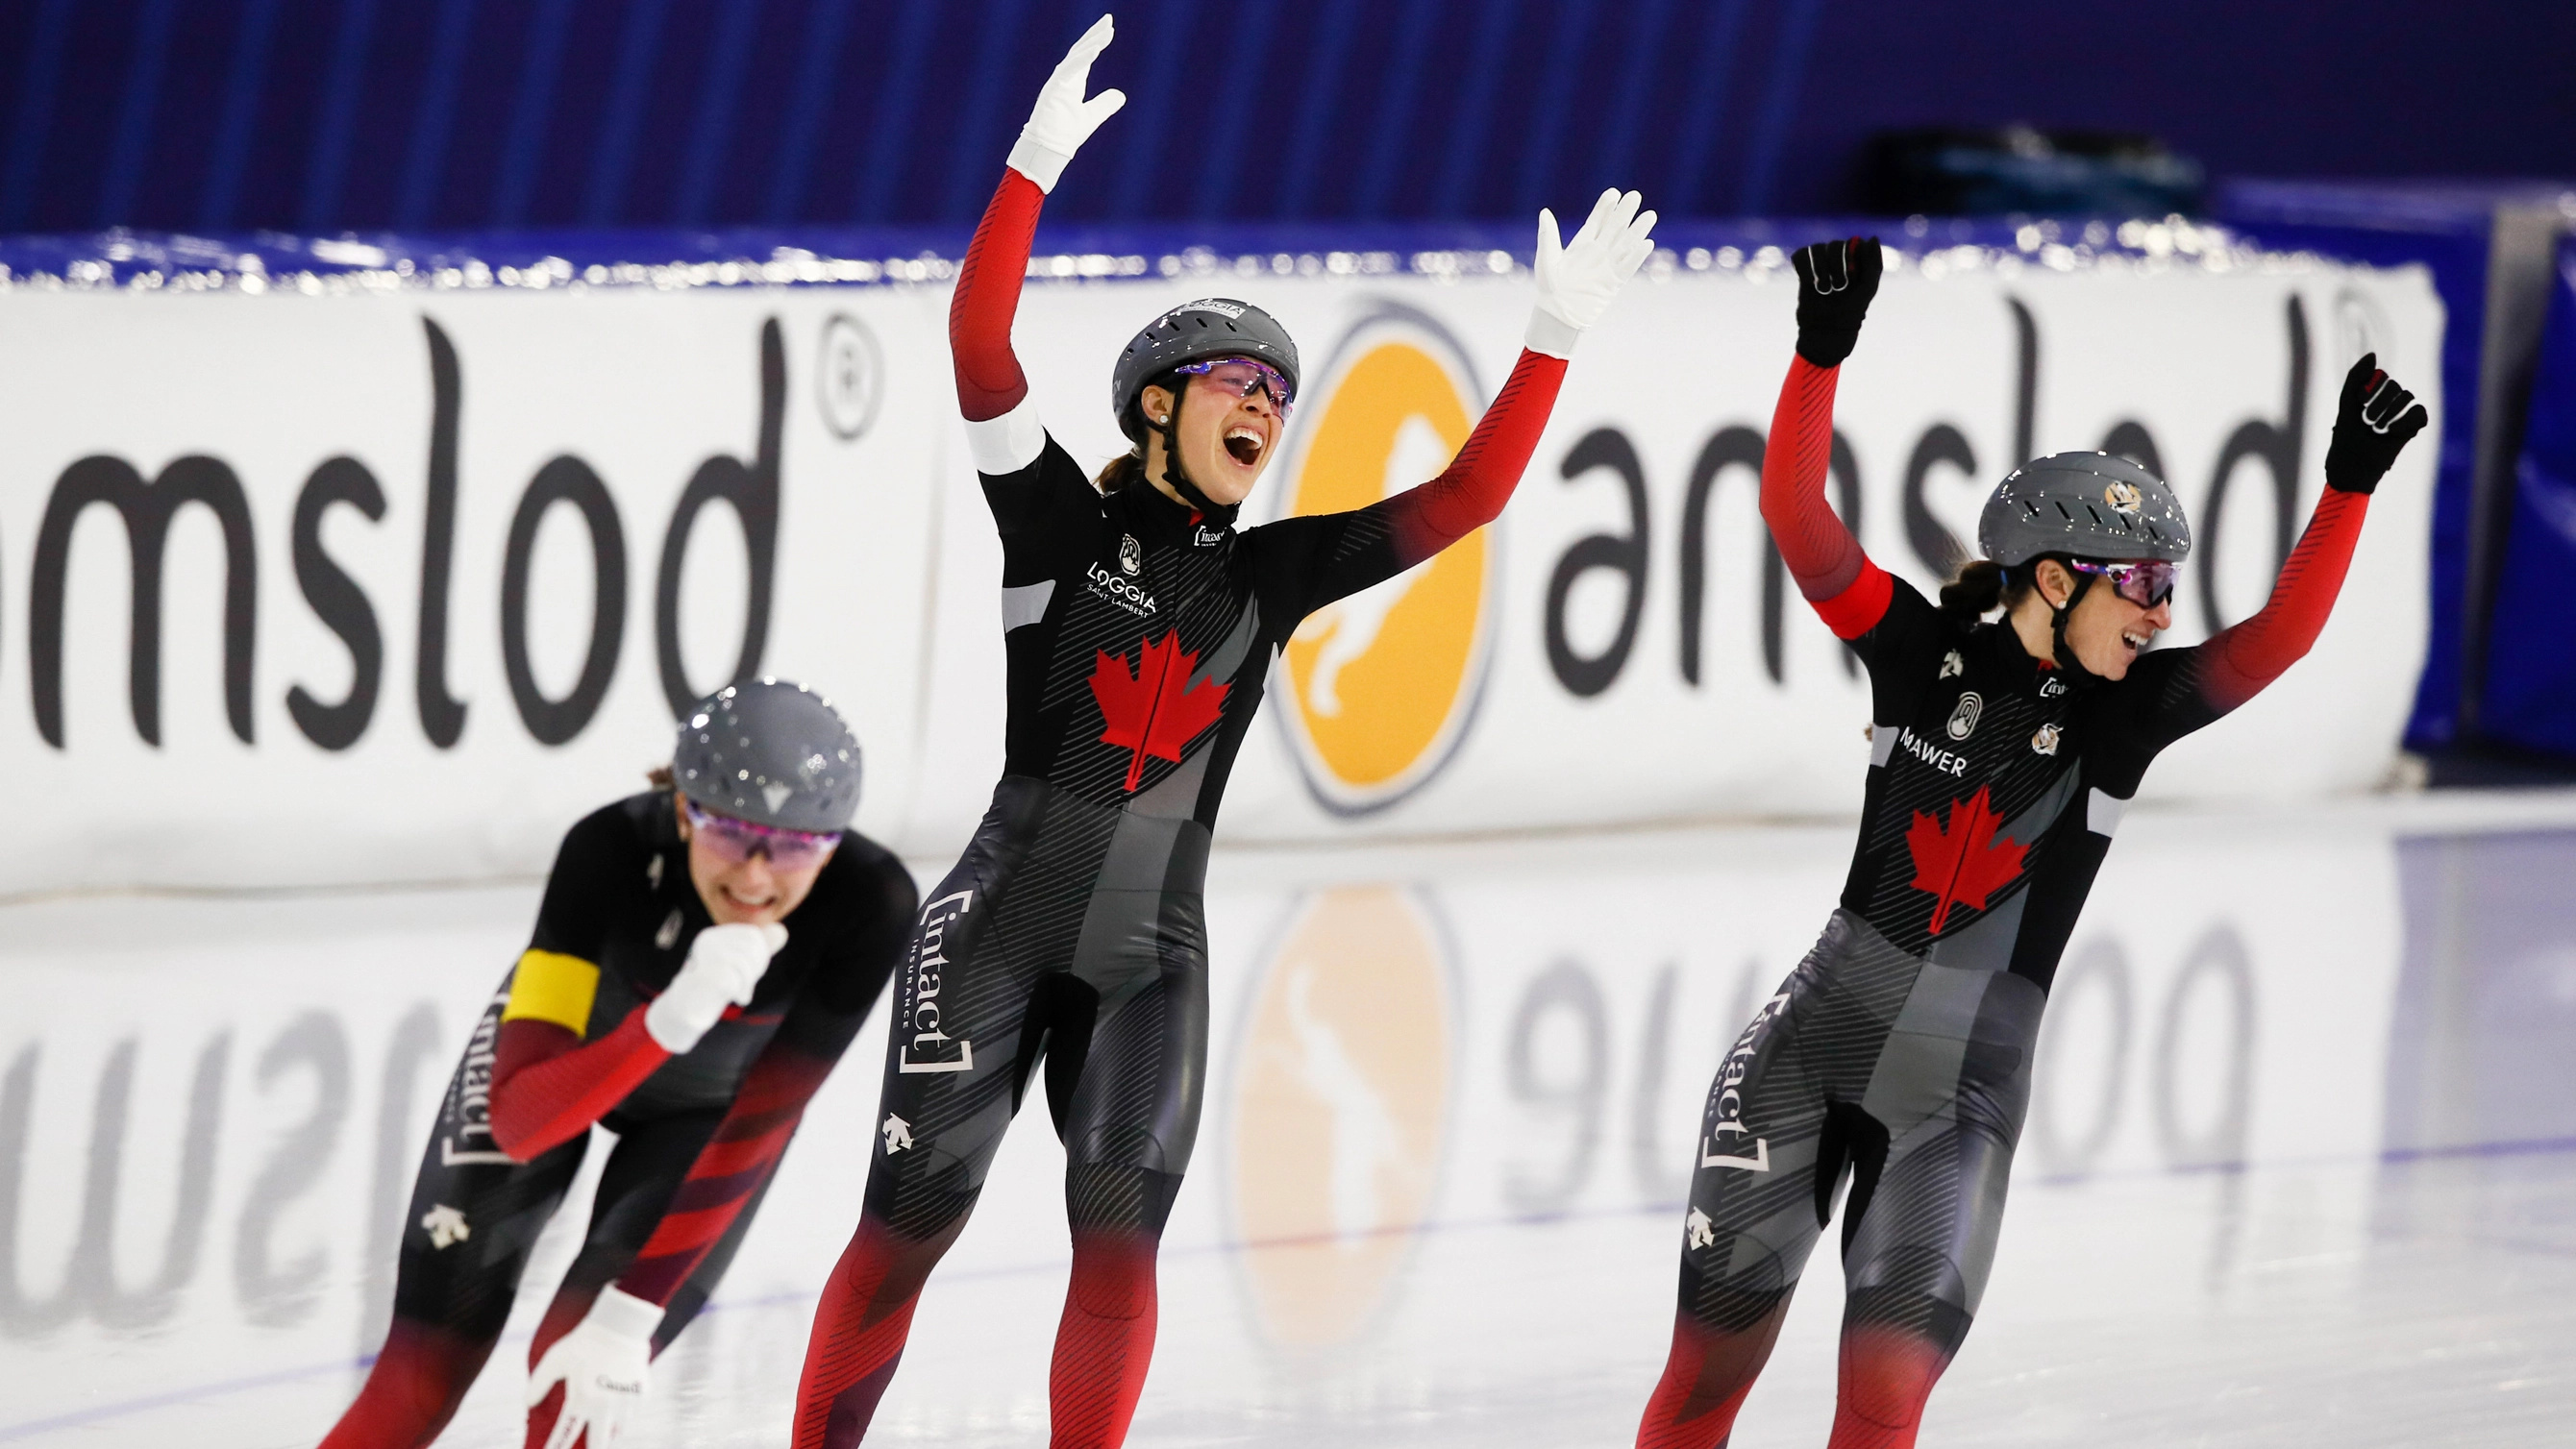 Speed Skating: Team Canada, Long track speed skaters, Winners of 37 Olympic and over 150 World Championship medals. 2680x1510 HD Wallpaper.